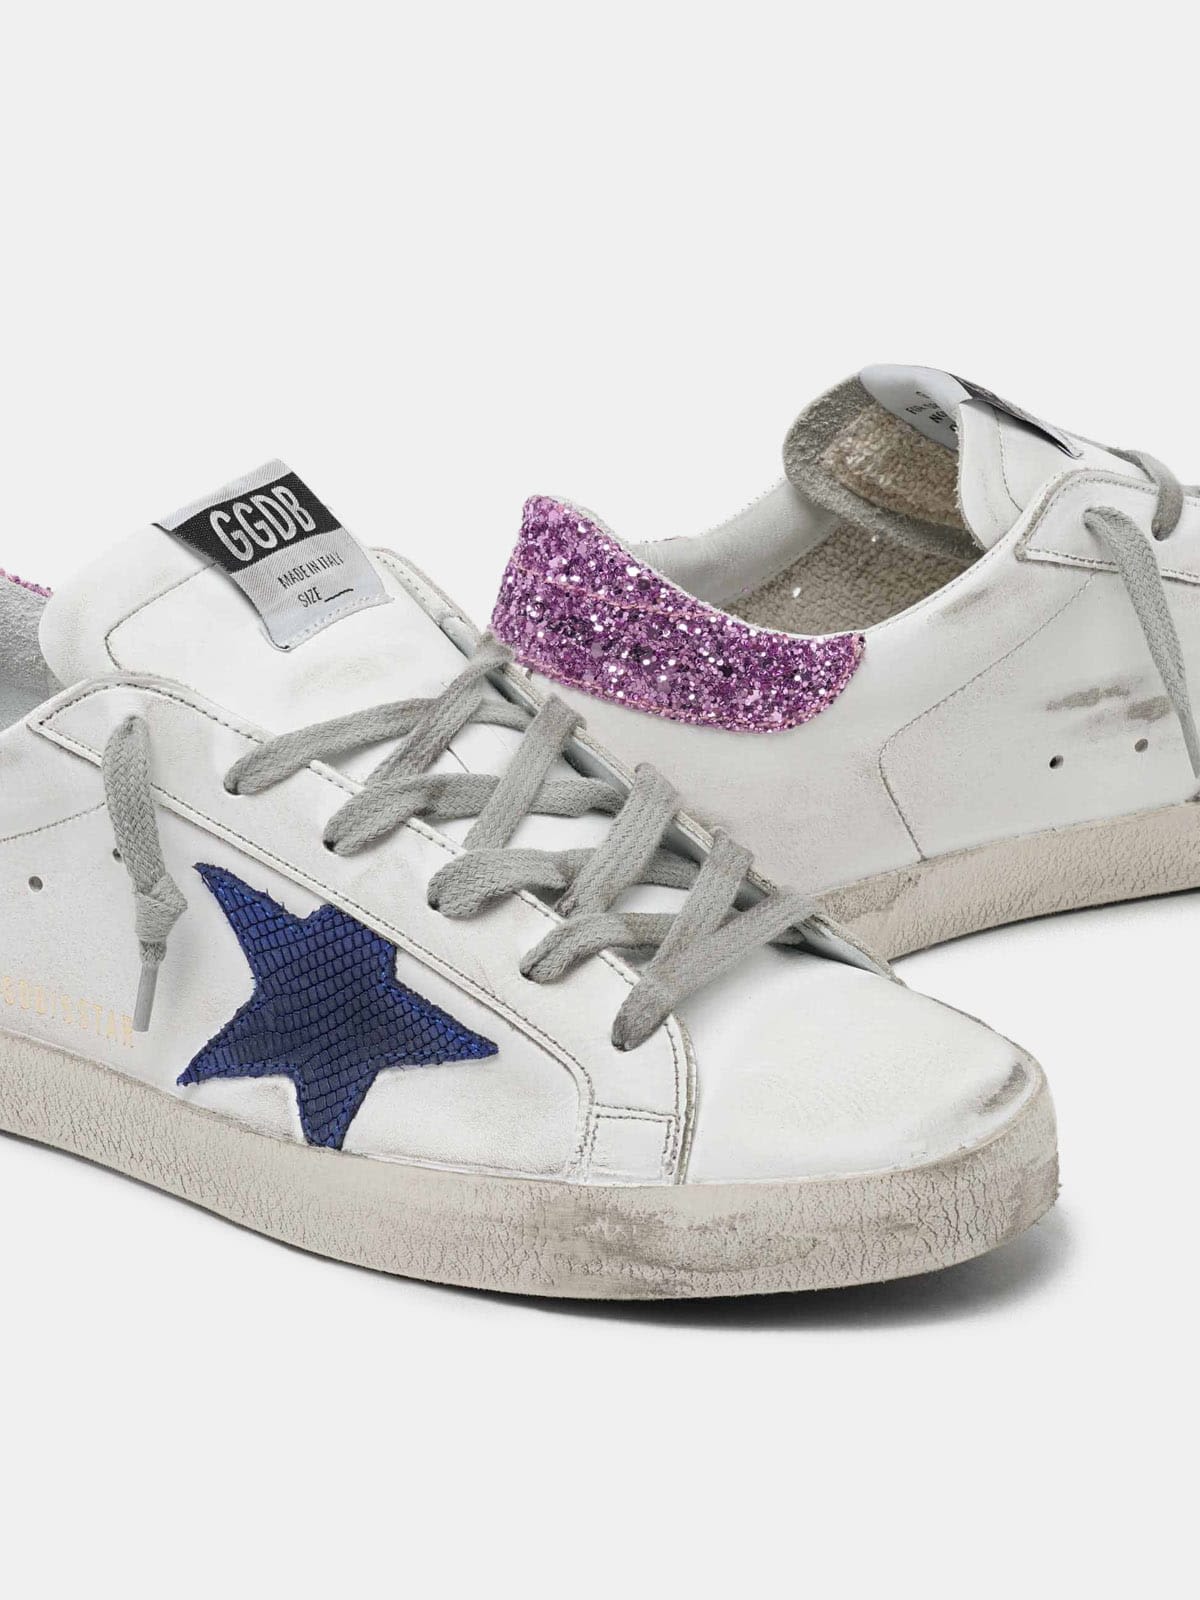 White Super-Star sneakers with blue star and glittery heel tab